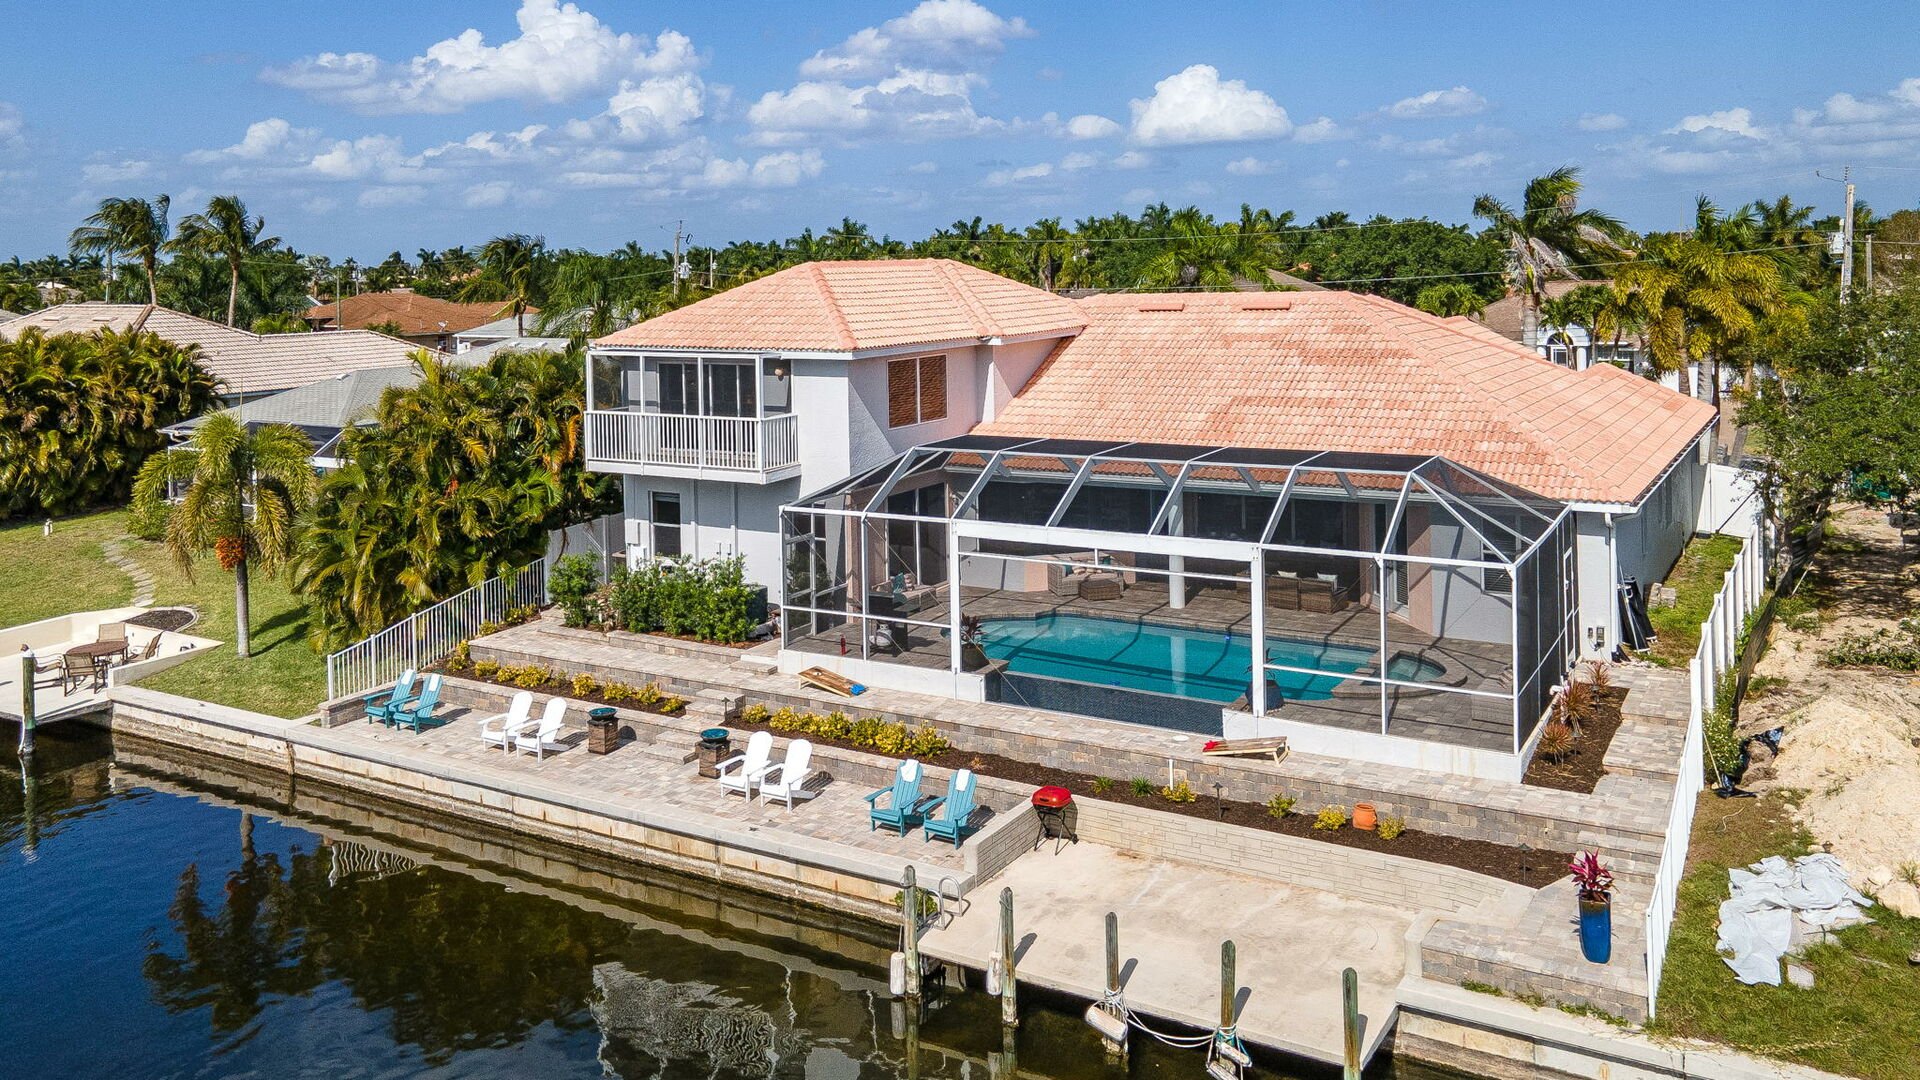 5 bedroom vacation home with heated pool on the water